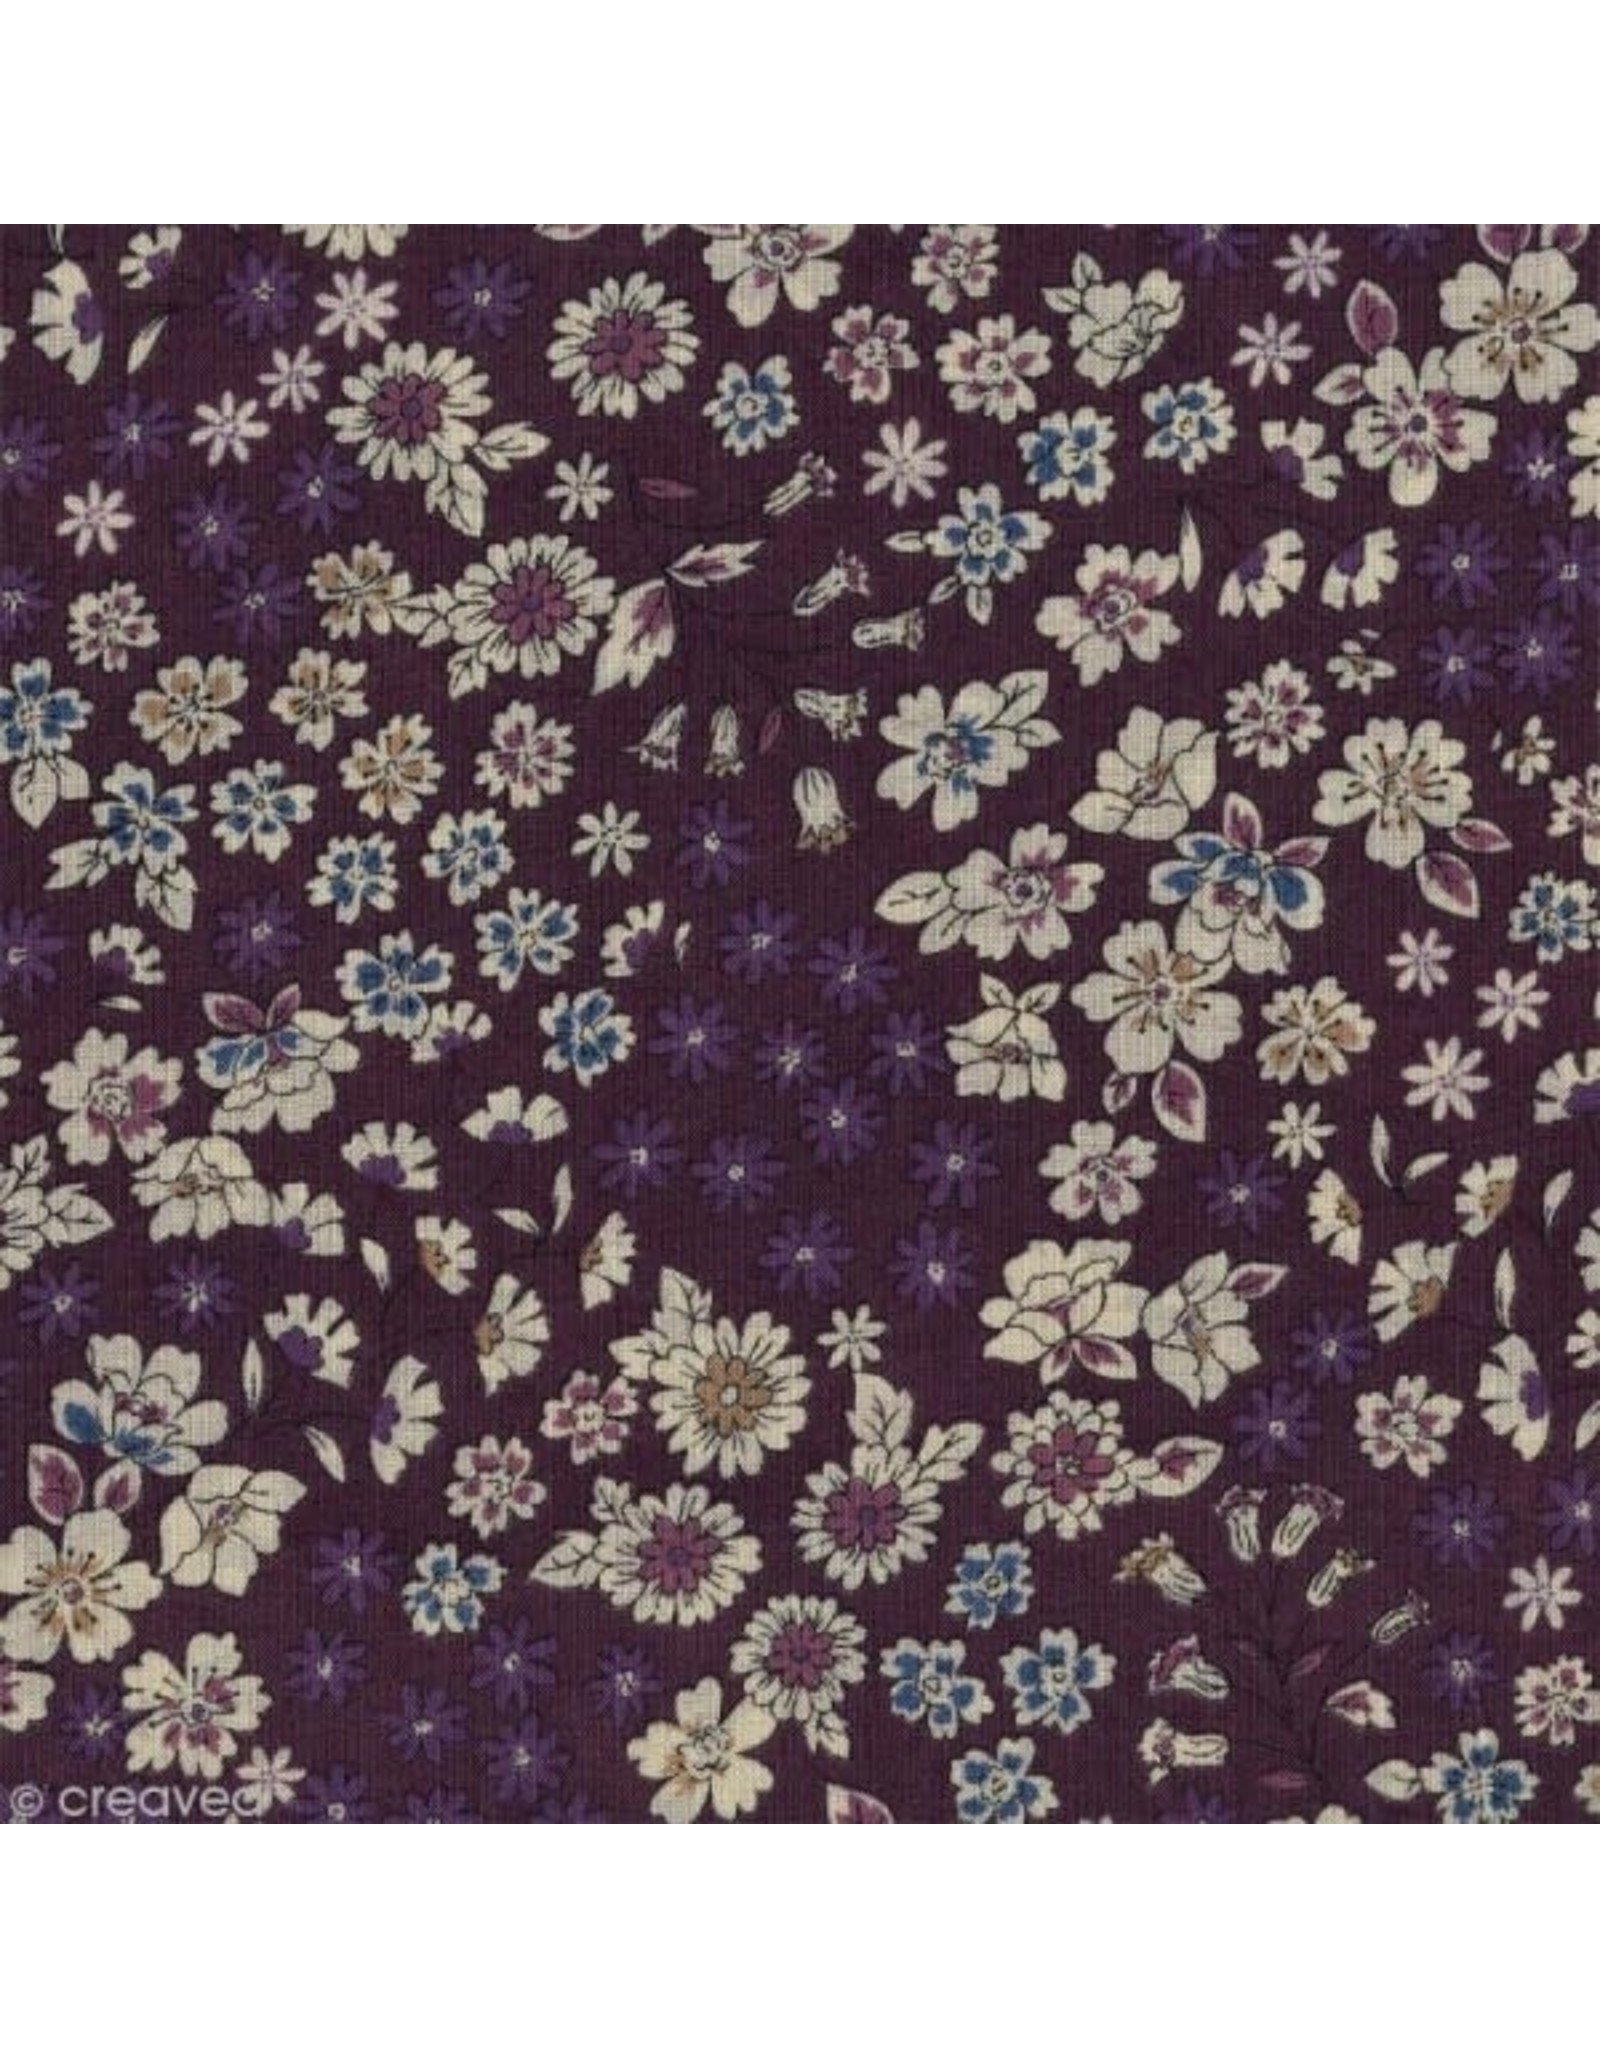 Frou-Frou, France Bias Tape, Fleuri in Violet, 3/4" Double Fold, sold by the 1/2 yard